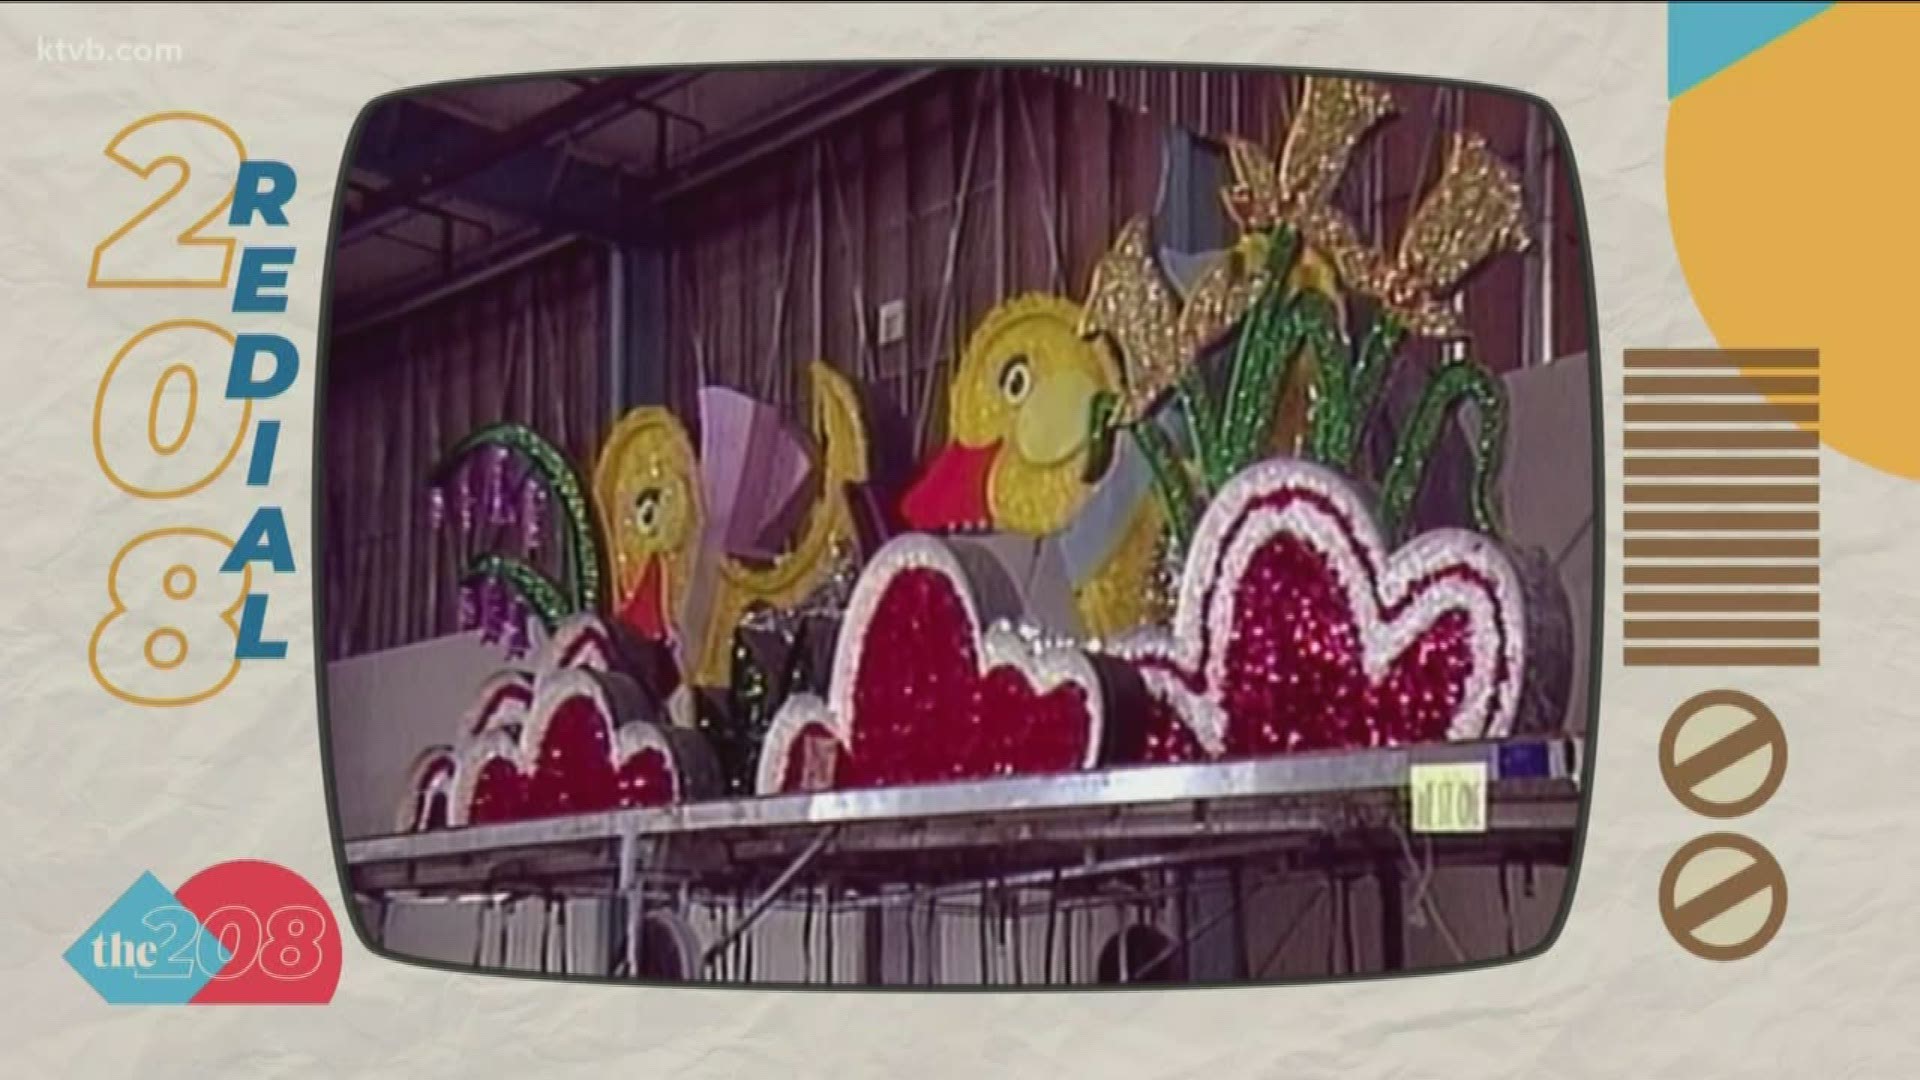 Nearly 30 years ago, the Boise River was filled with 16 50-foot long floats for the Light Parade.